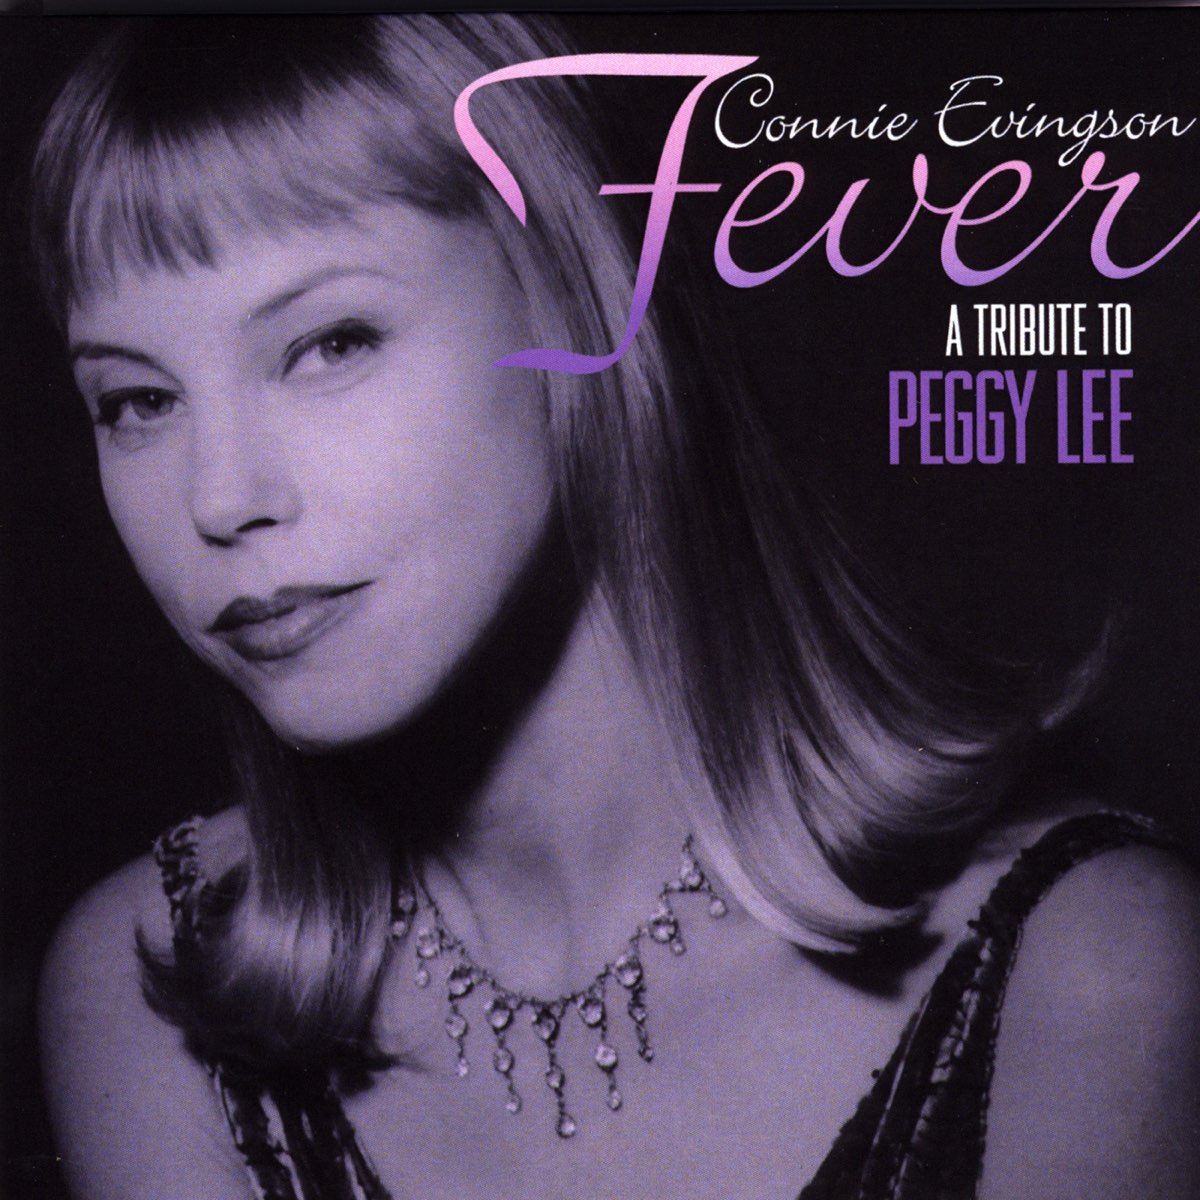 fever-a-tribute-to-peggy-lee-by-connie-evingson-on-apple-music